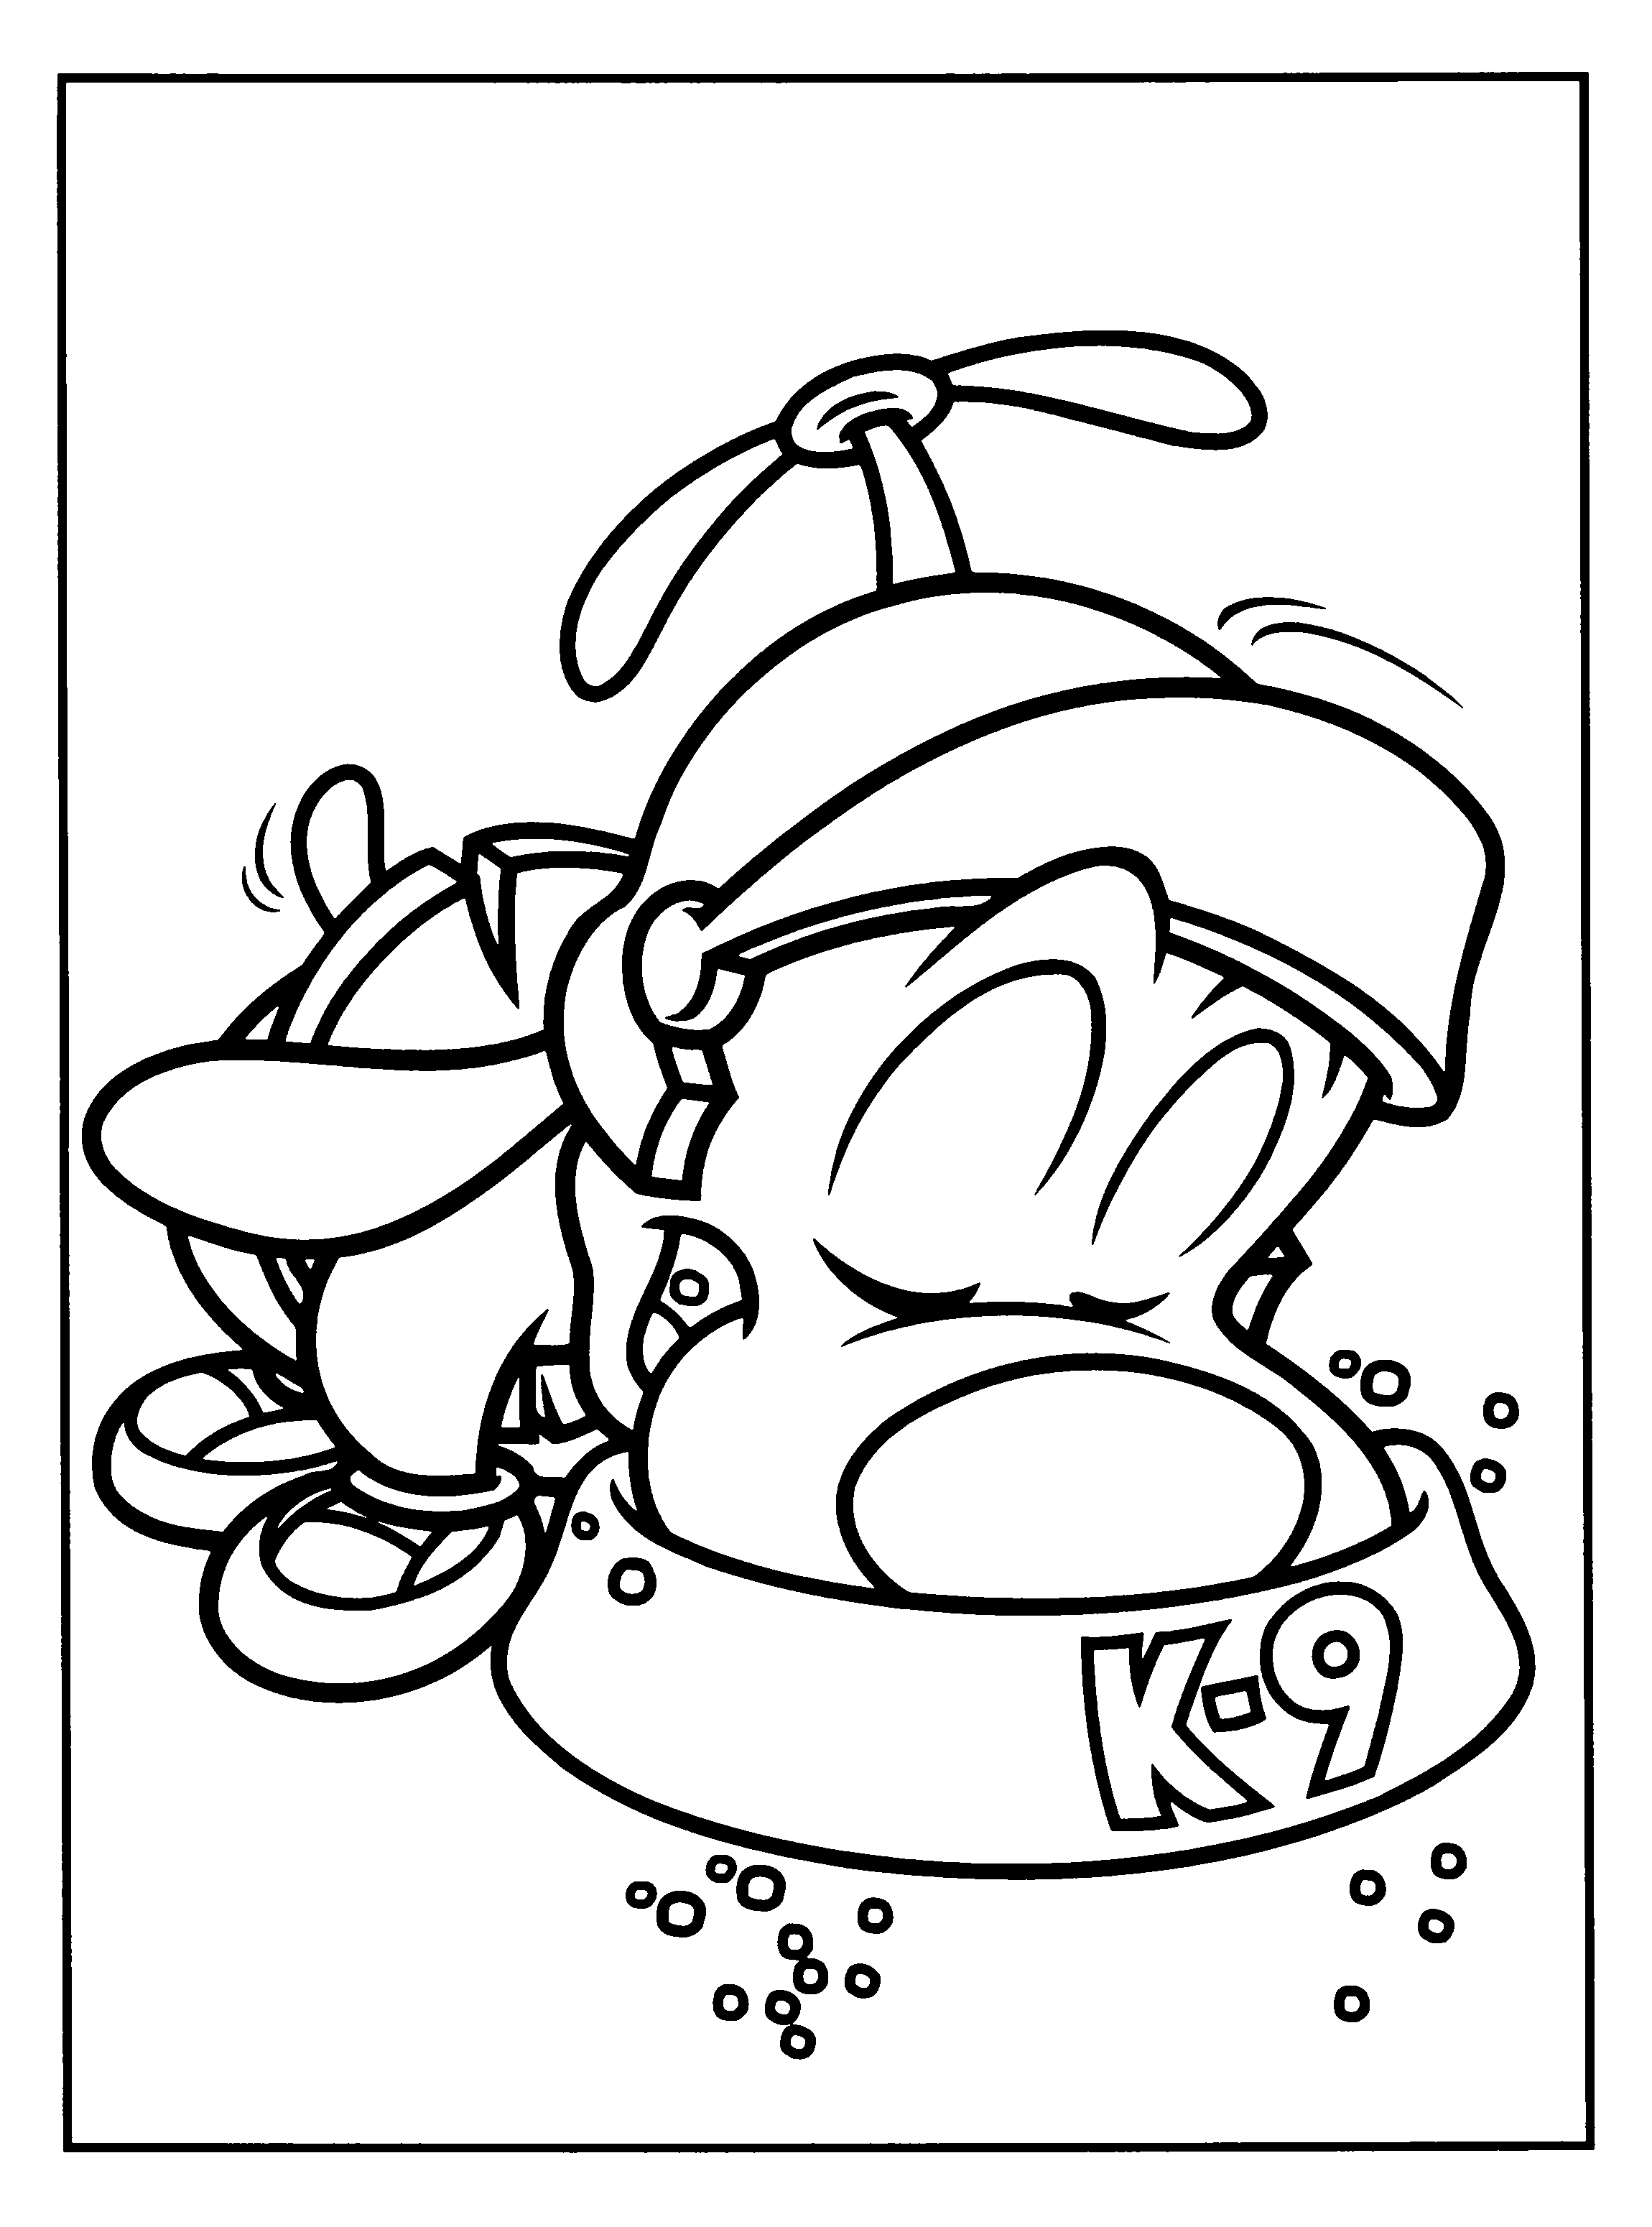 animated-coloring-pages-looney-tunes-image-0023